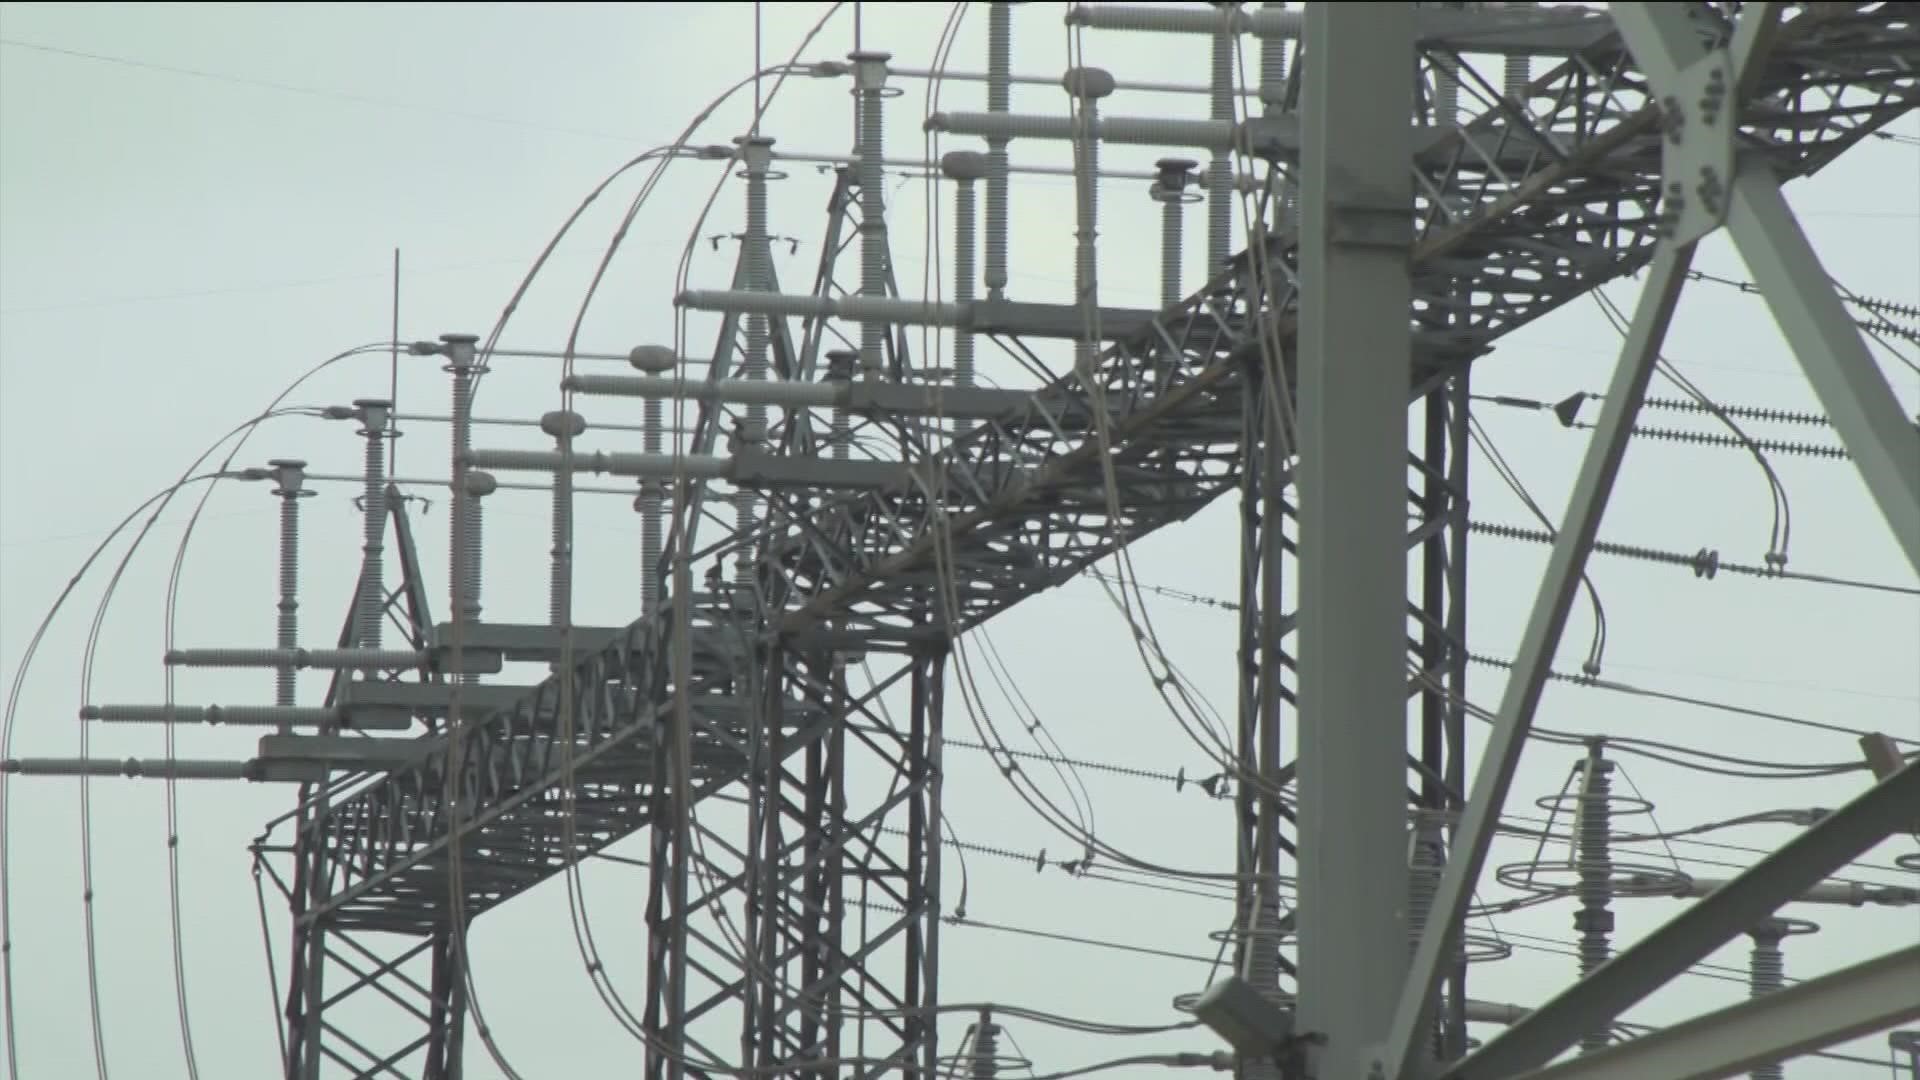 Starting next year, power generators and transmission companies will have to consider temperature standards for 10 different areas across Texas.